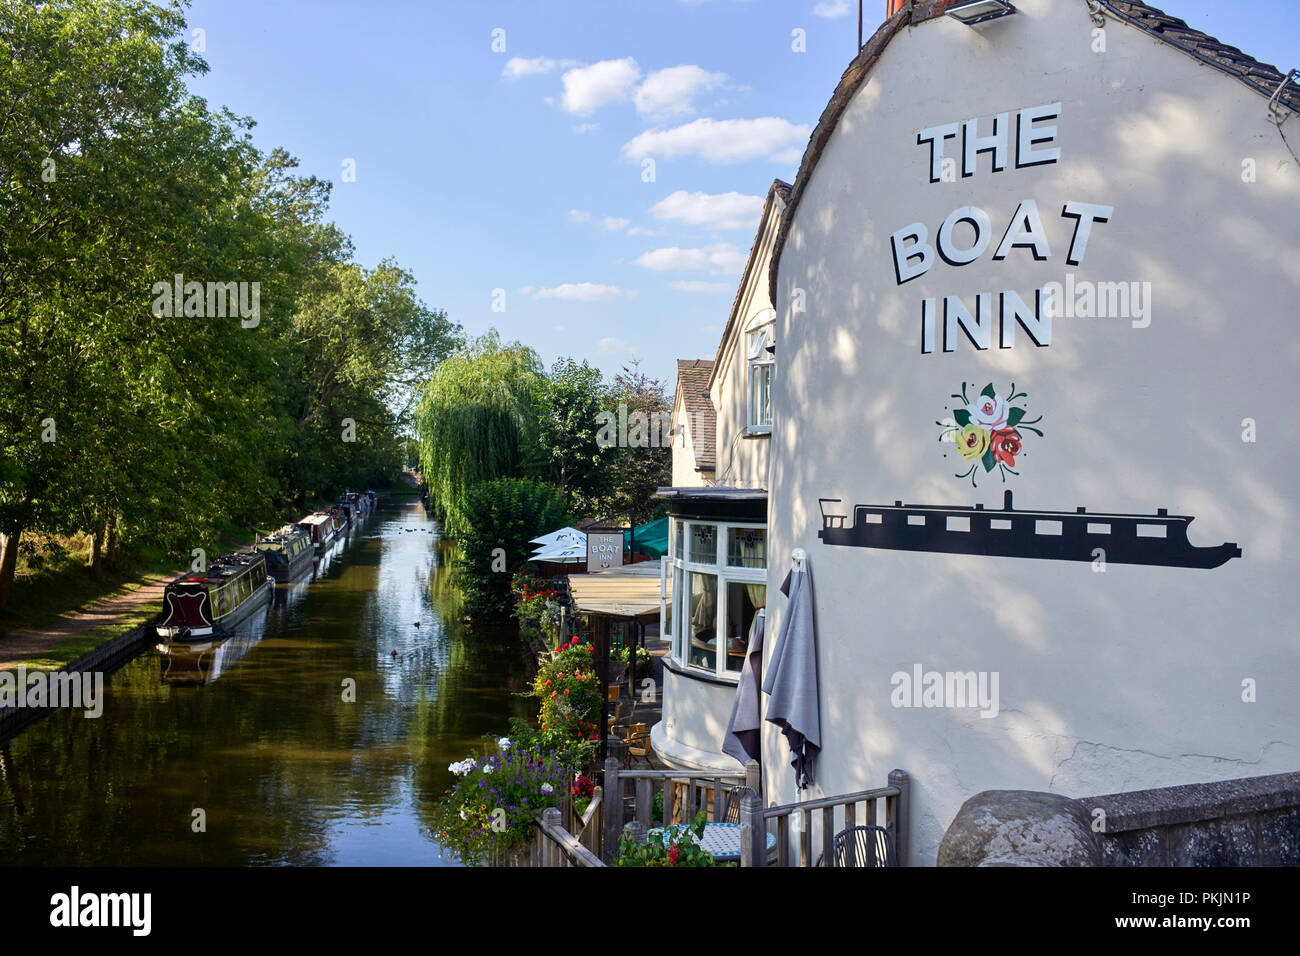 The boat inn and Shropshire Union canal at Gnosall Stock Photo